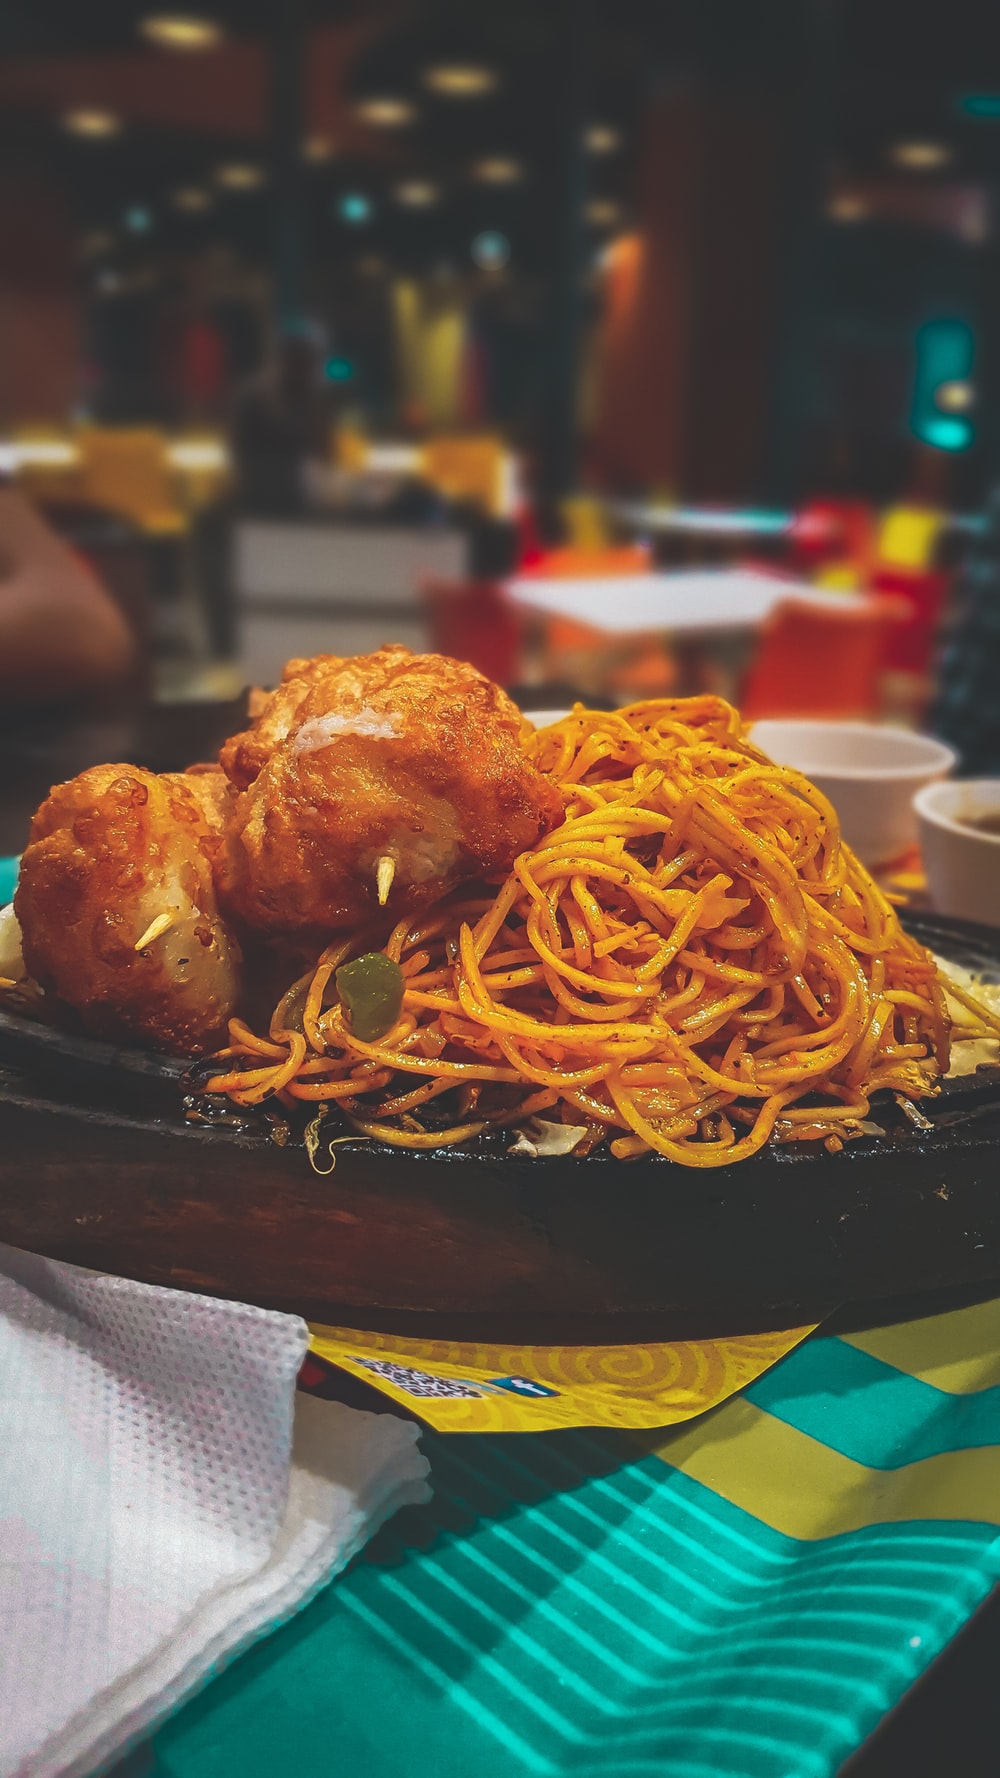 spaghetti and fried chicken platter on table photo